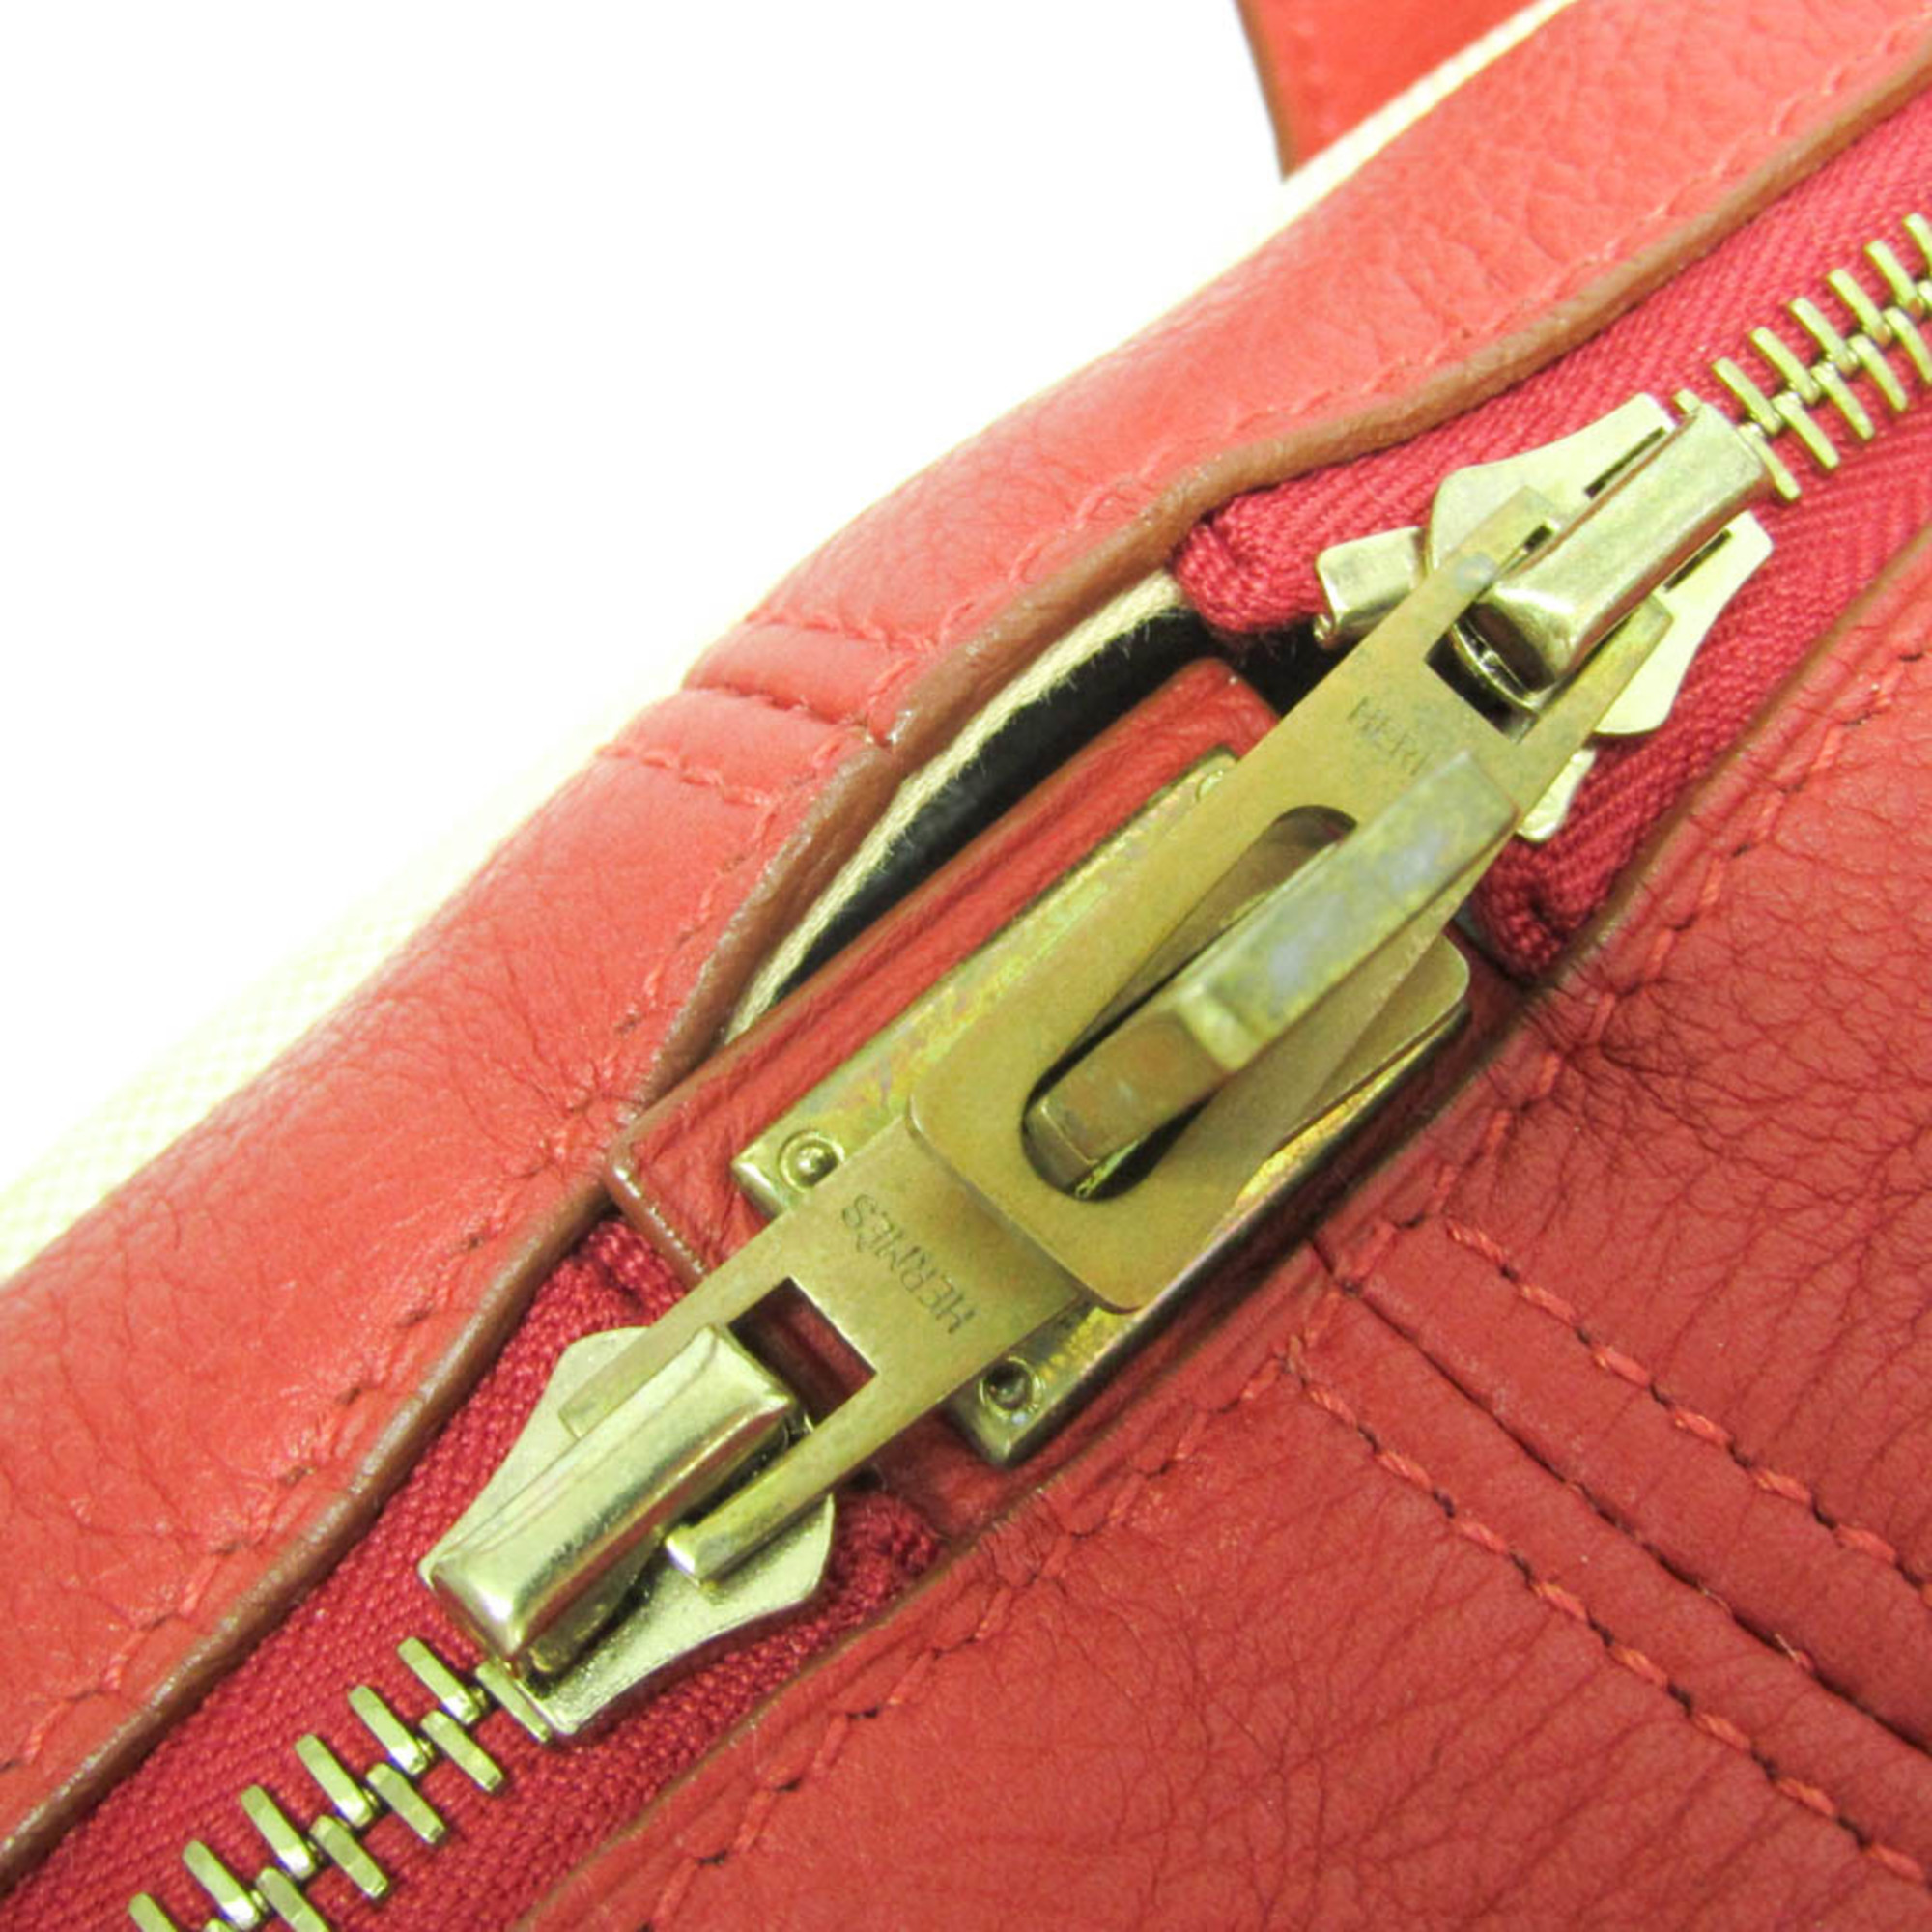 Hermes Victoria 50 Men,Women Toile H,Taurillon Clemence Leather Boston Bag Natural,Red Color